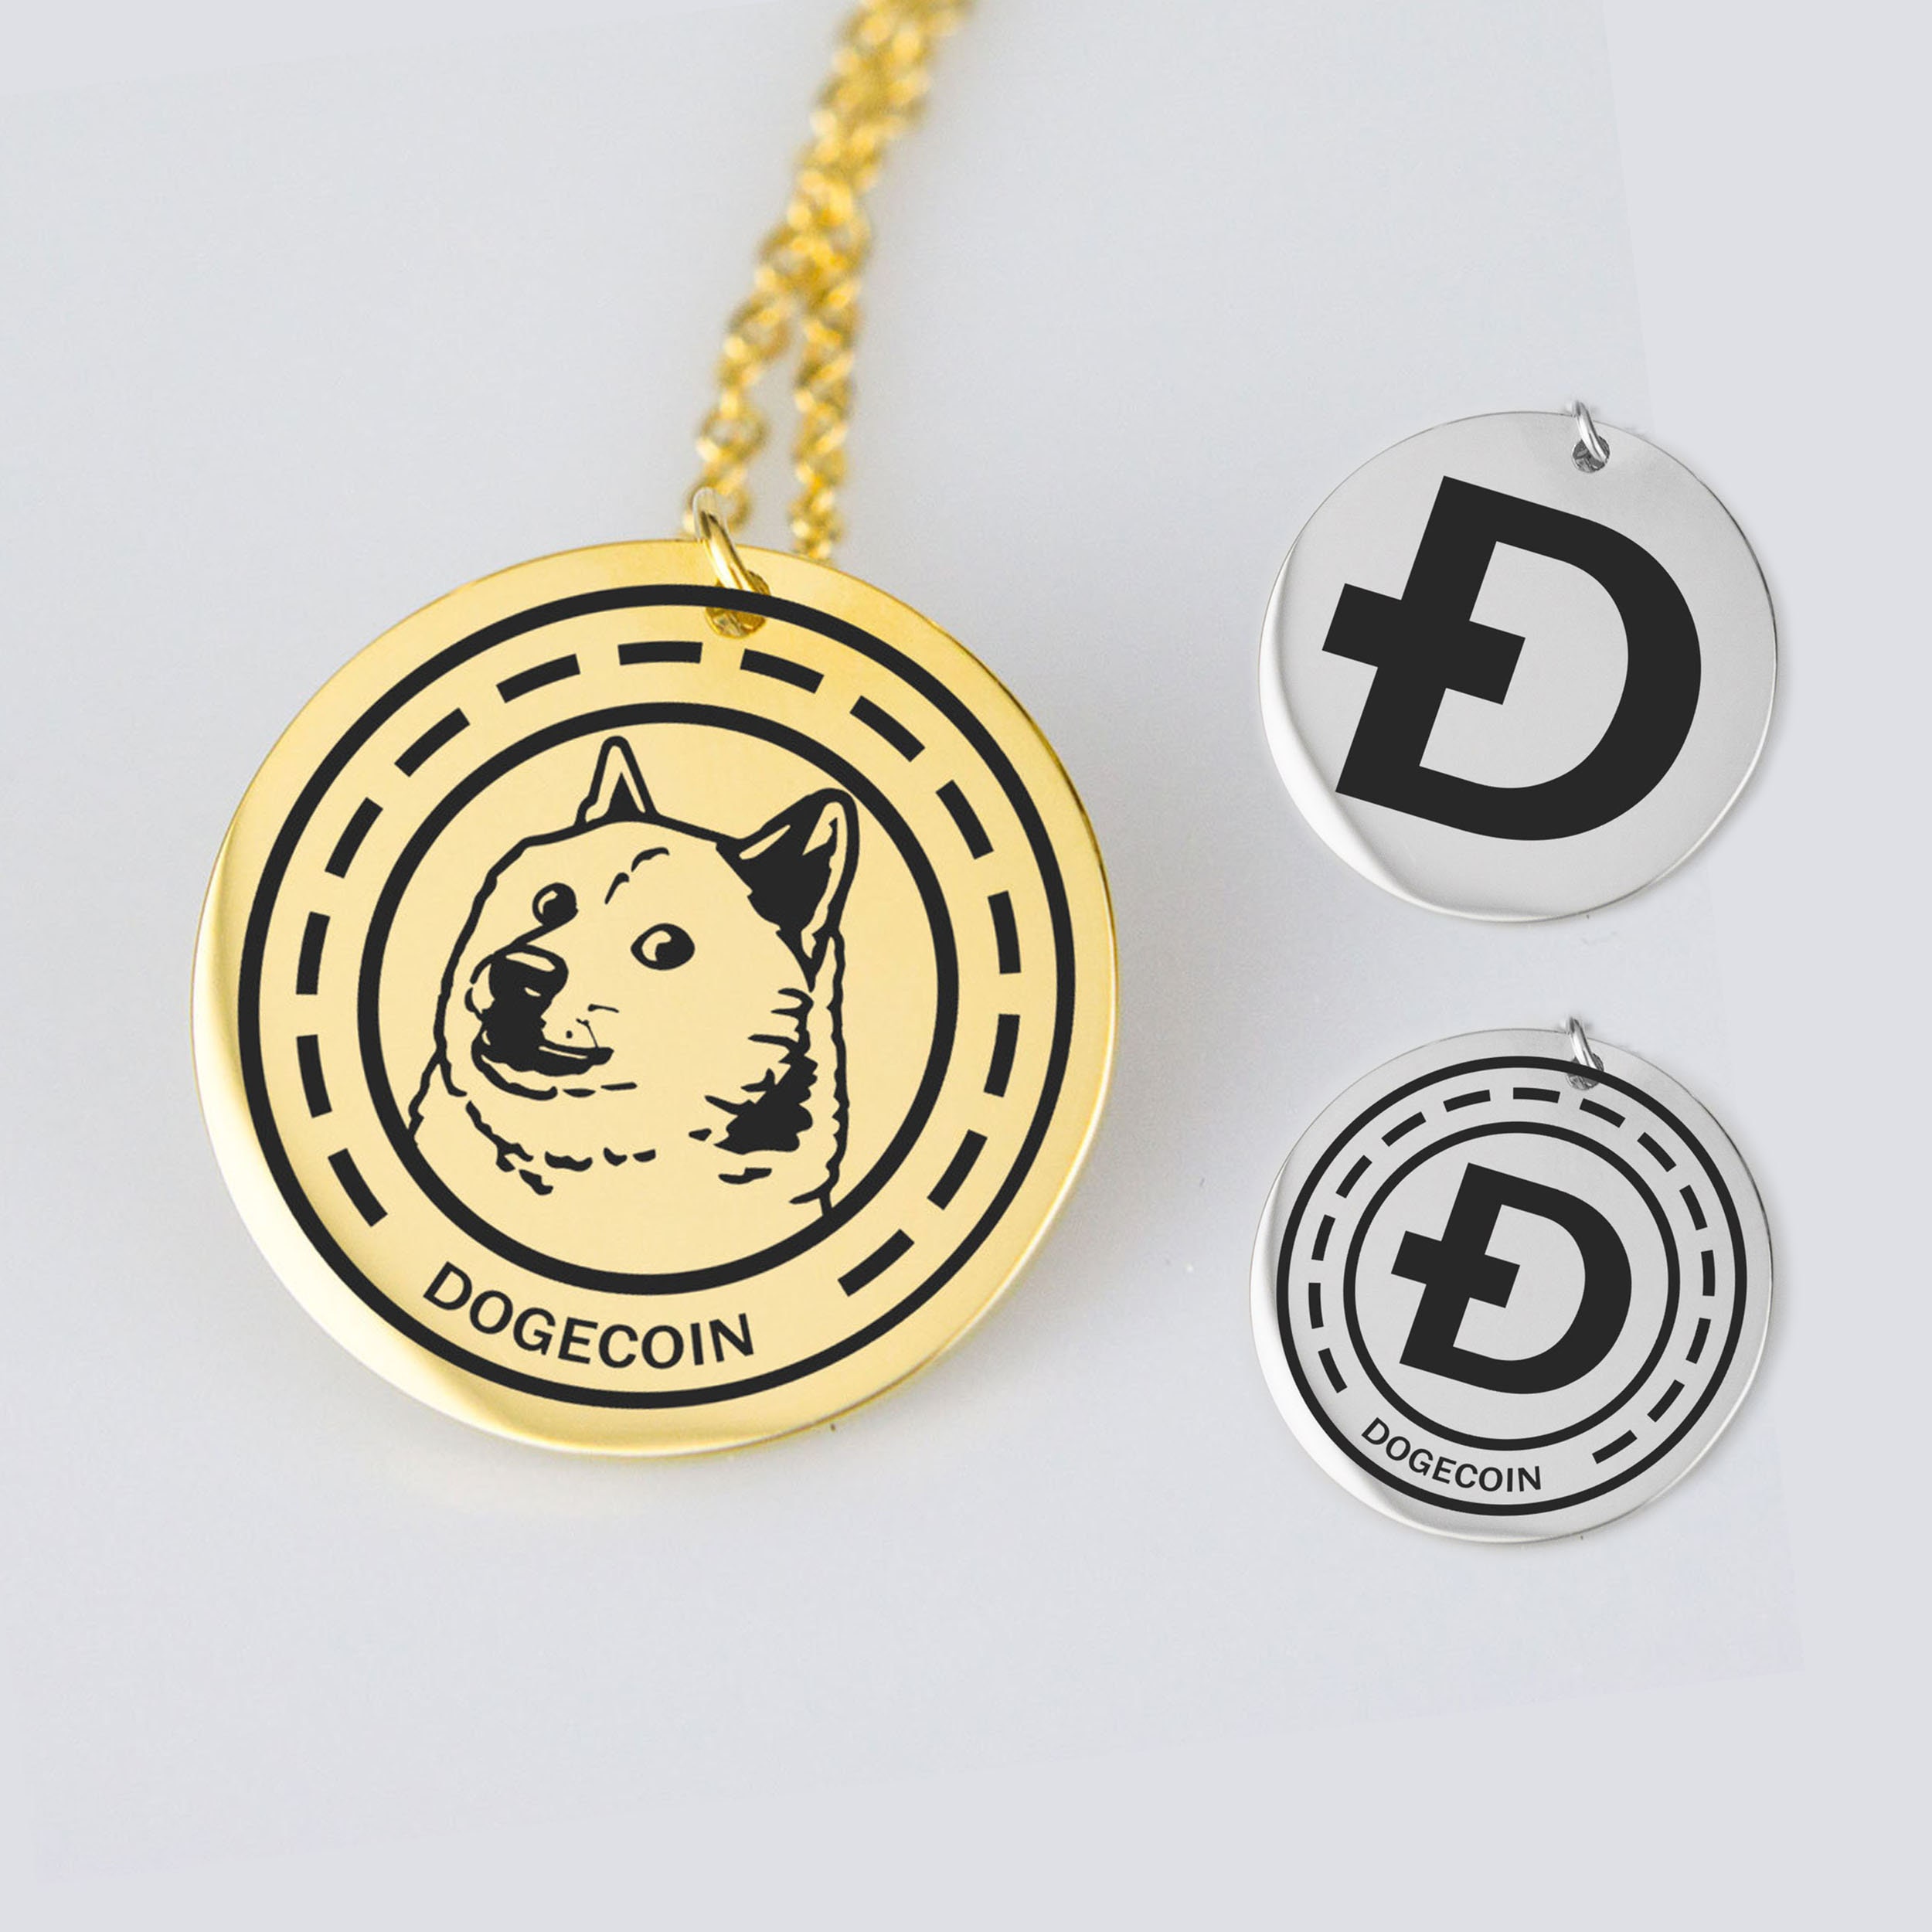 Dogecoin Keychain Cryptocurrency Coin Key ring Doge Coin Meme Key chain Crypto currency trade miner Accessory Dogecoin keyring